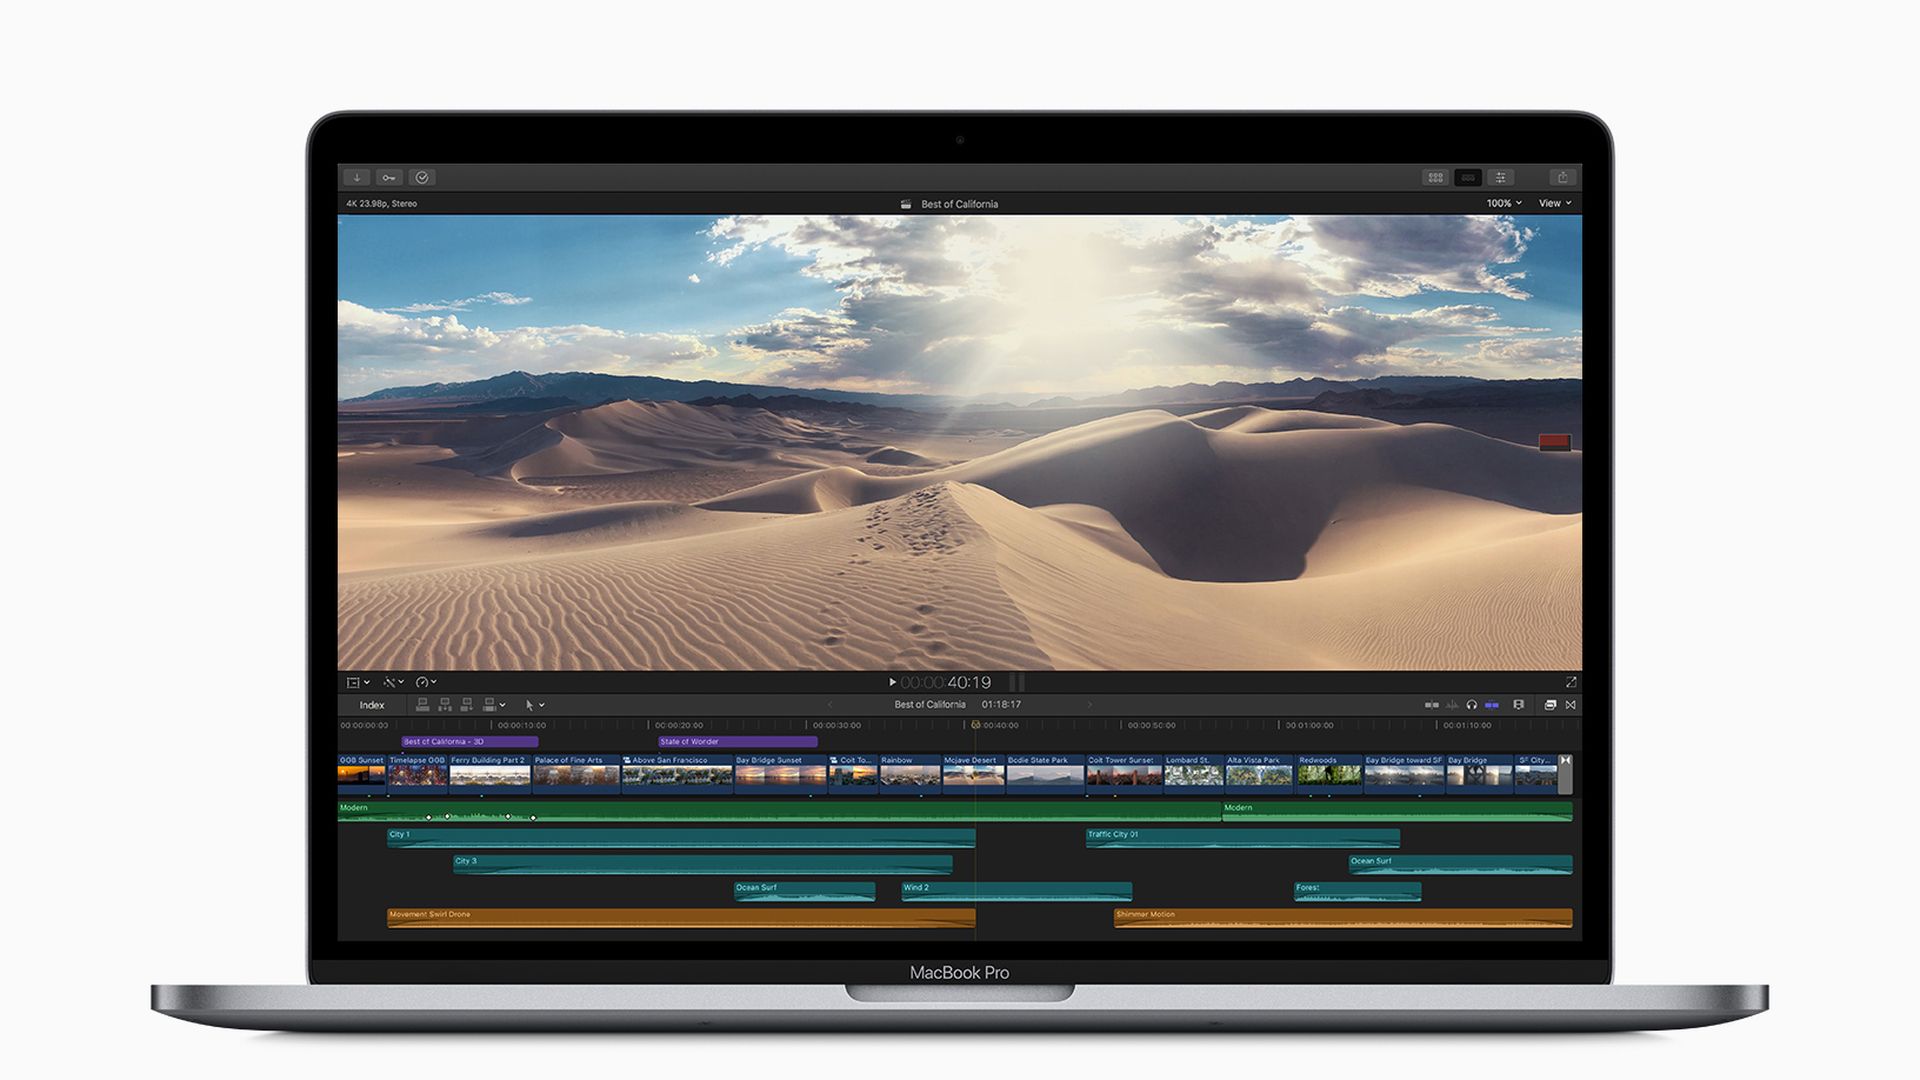 Apple's new MacBook Pro features a faster processor and a redesigned keyboard.